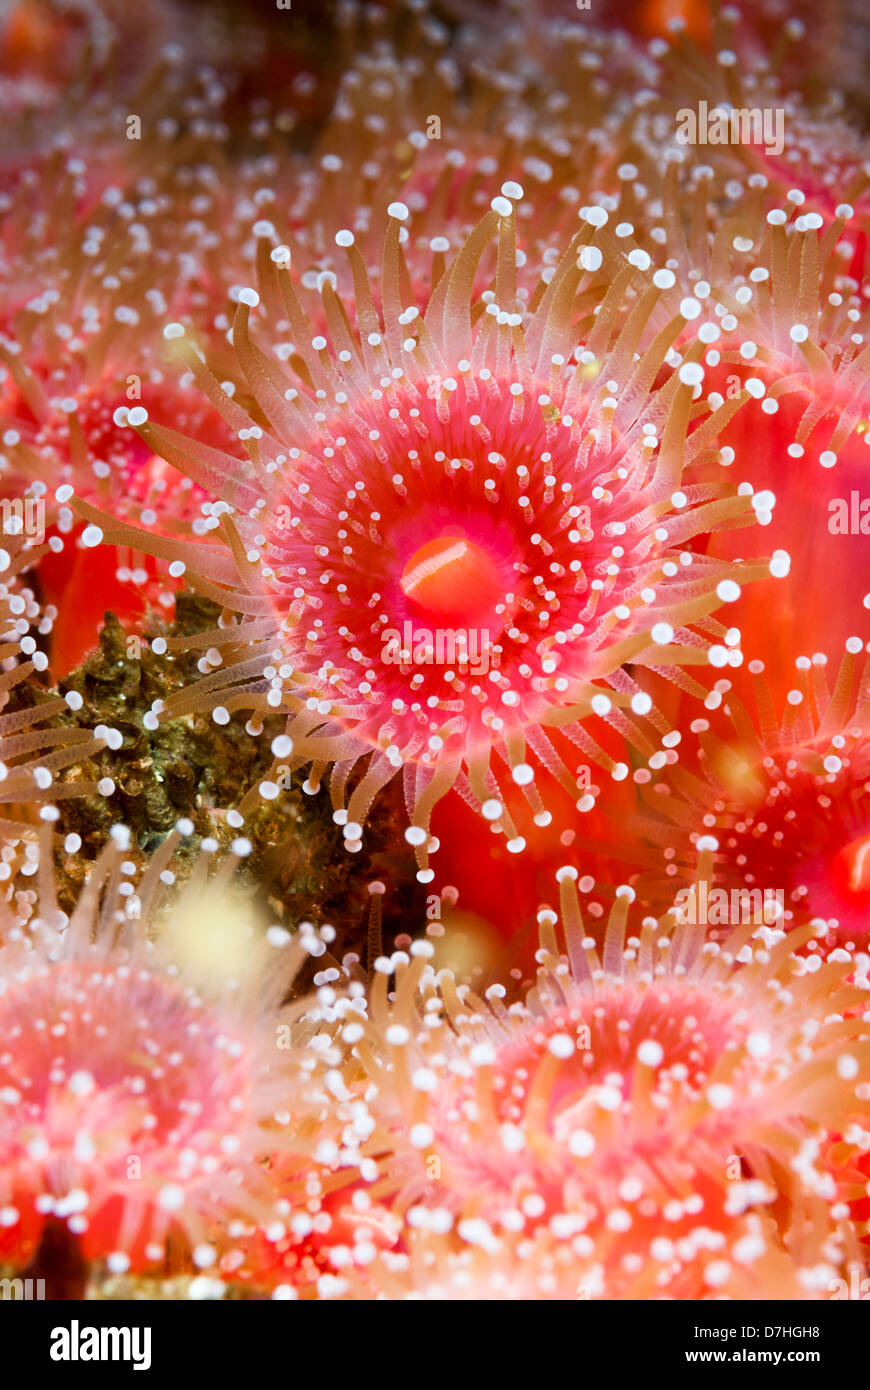 Red strawberry anemones with tentacles fully exposed Stock Photo